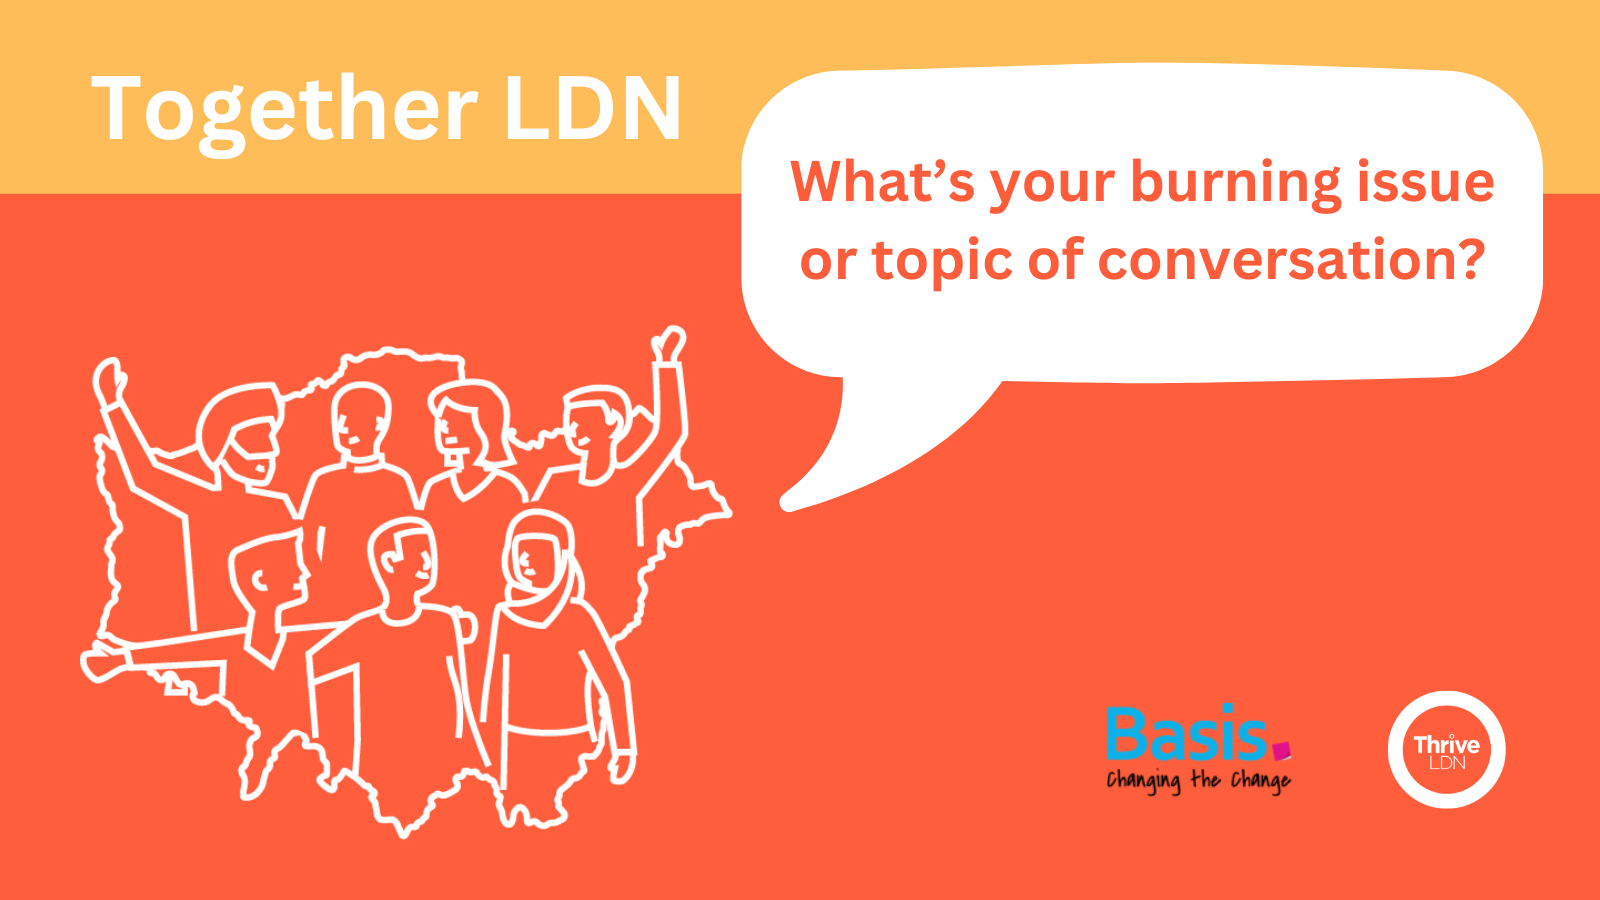 A speech bubble appears above a line drawing of a group of people inside a London area outline. In the bubble reads: What’s your burning issue or topic of conversation? The title of the event, Together LDN, is placed top left and the Basis and Thrive LDN logos bottom right.